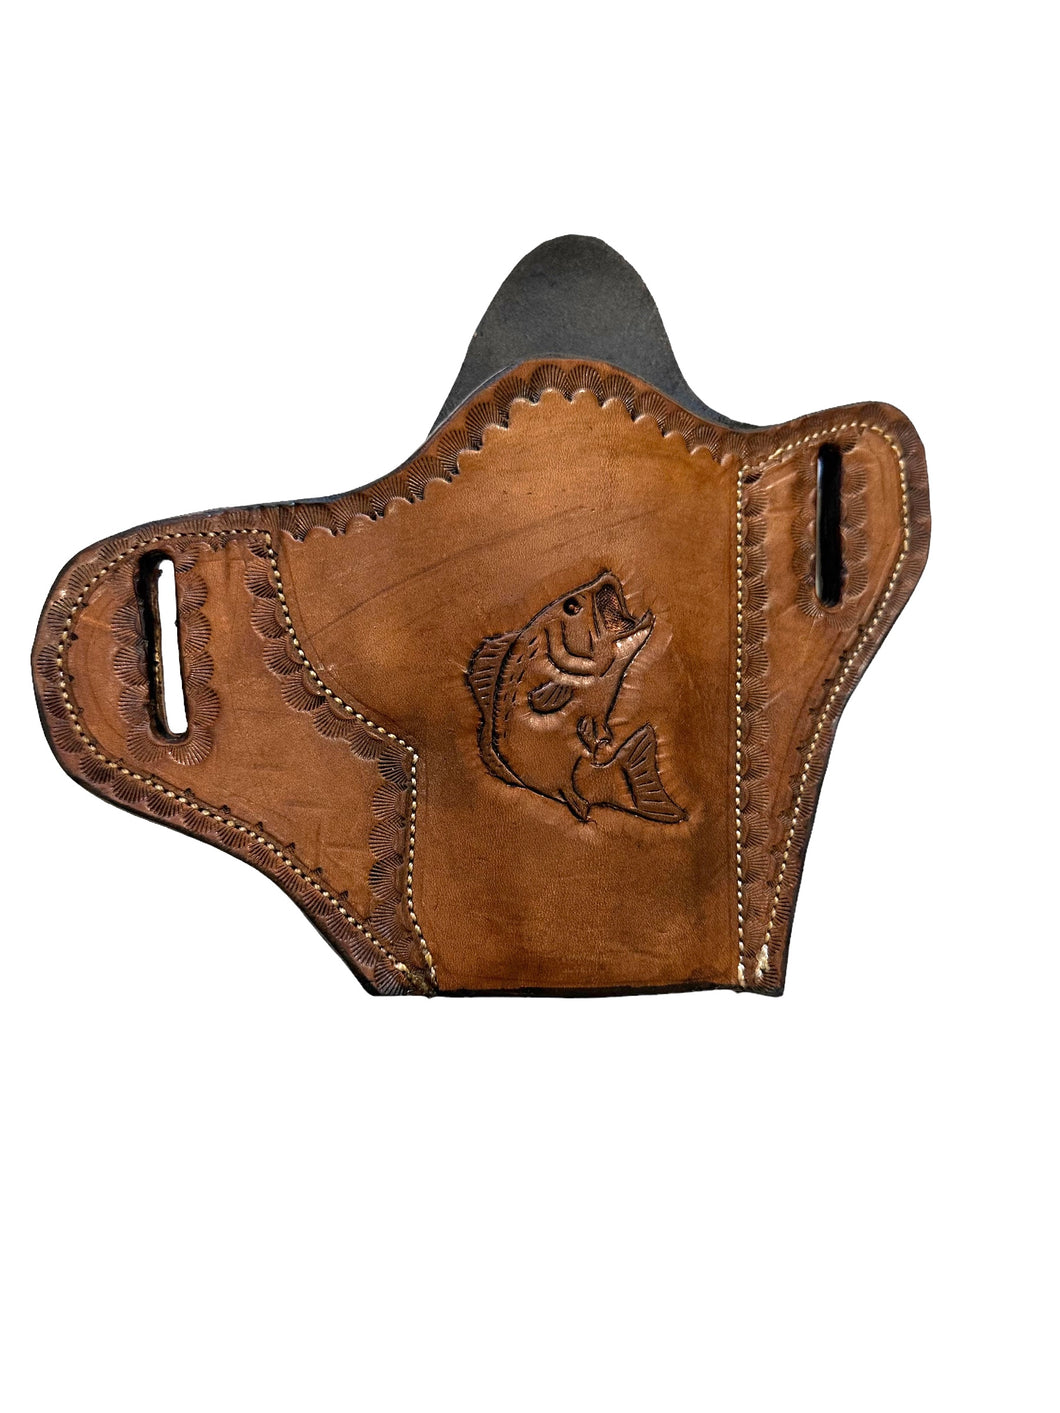 Leather gun holster with fish